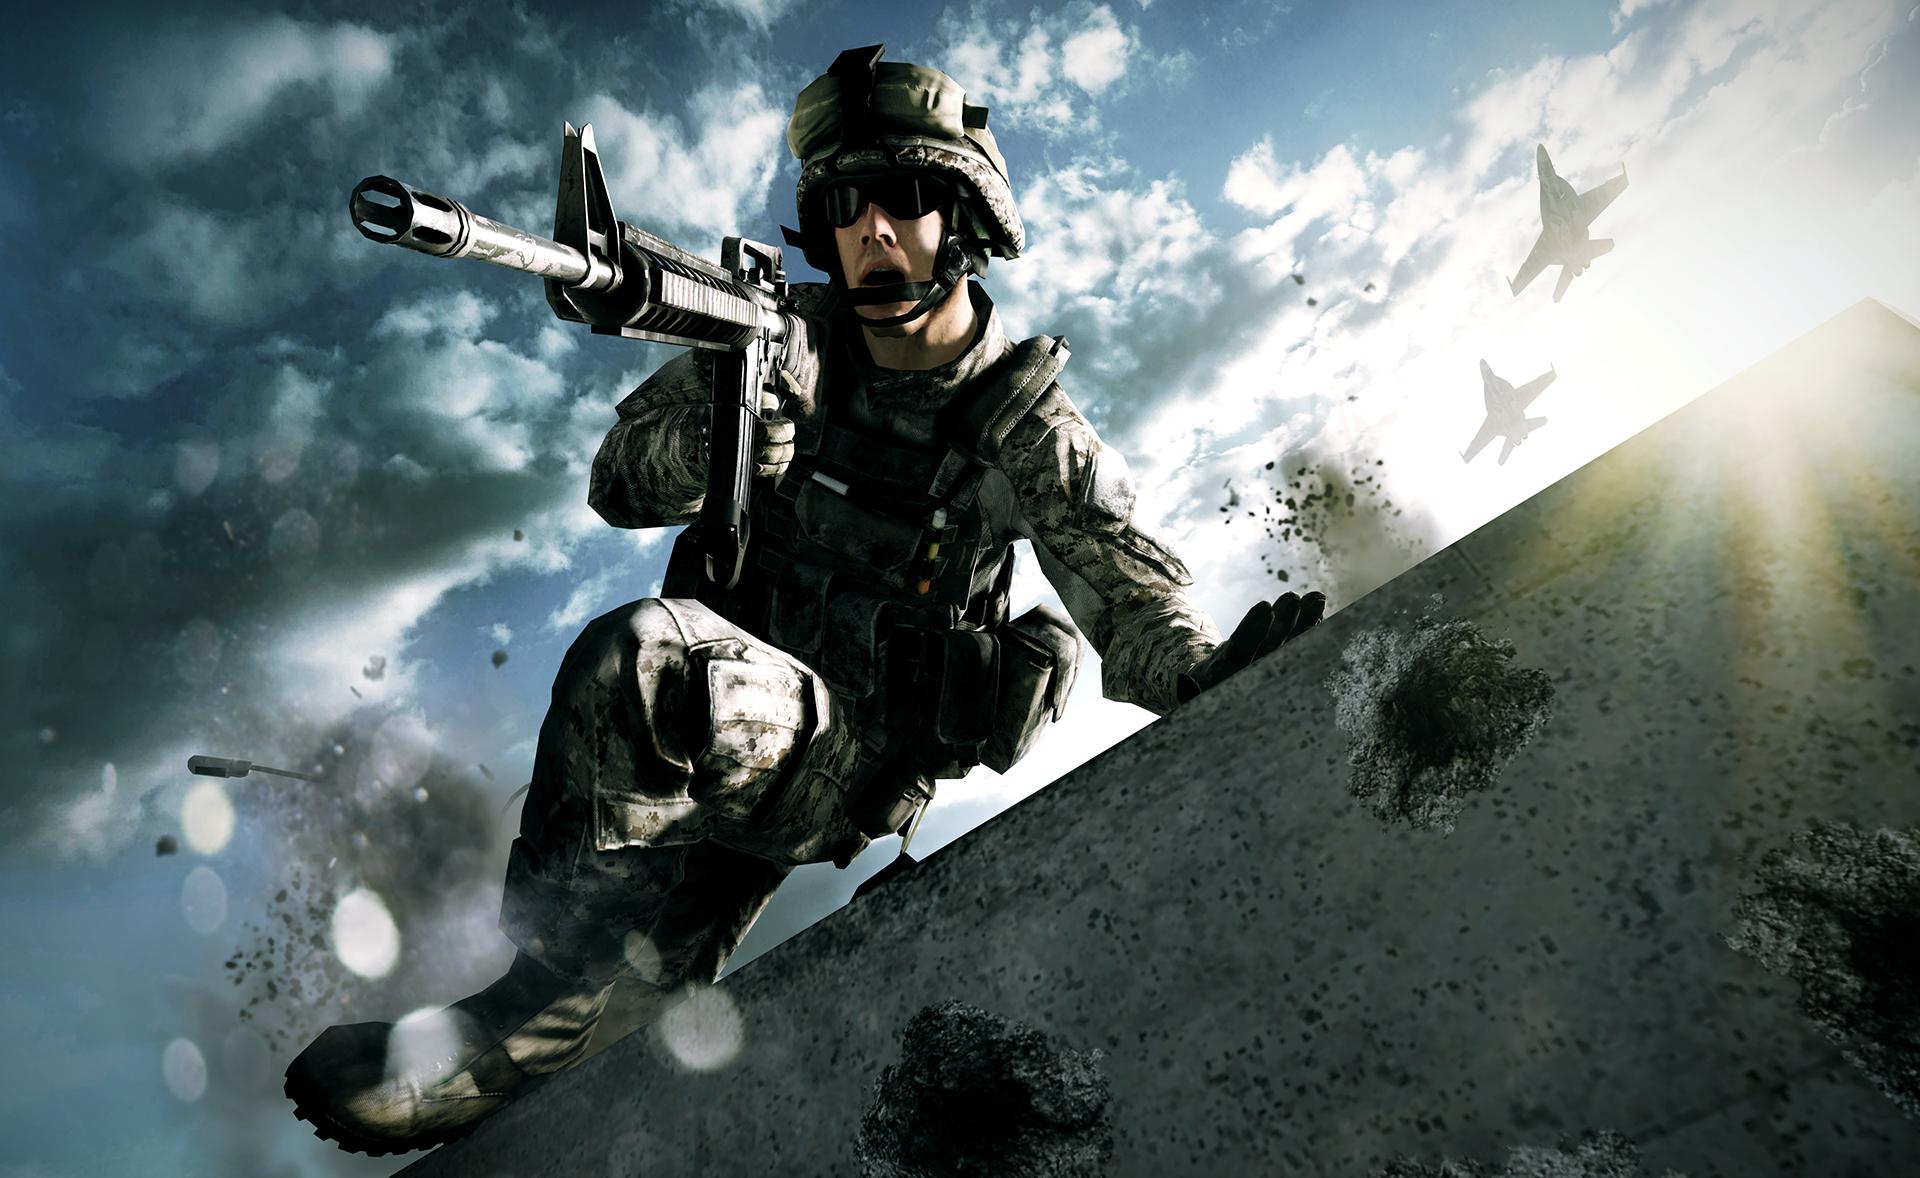 Cool military backgrounds